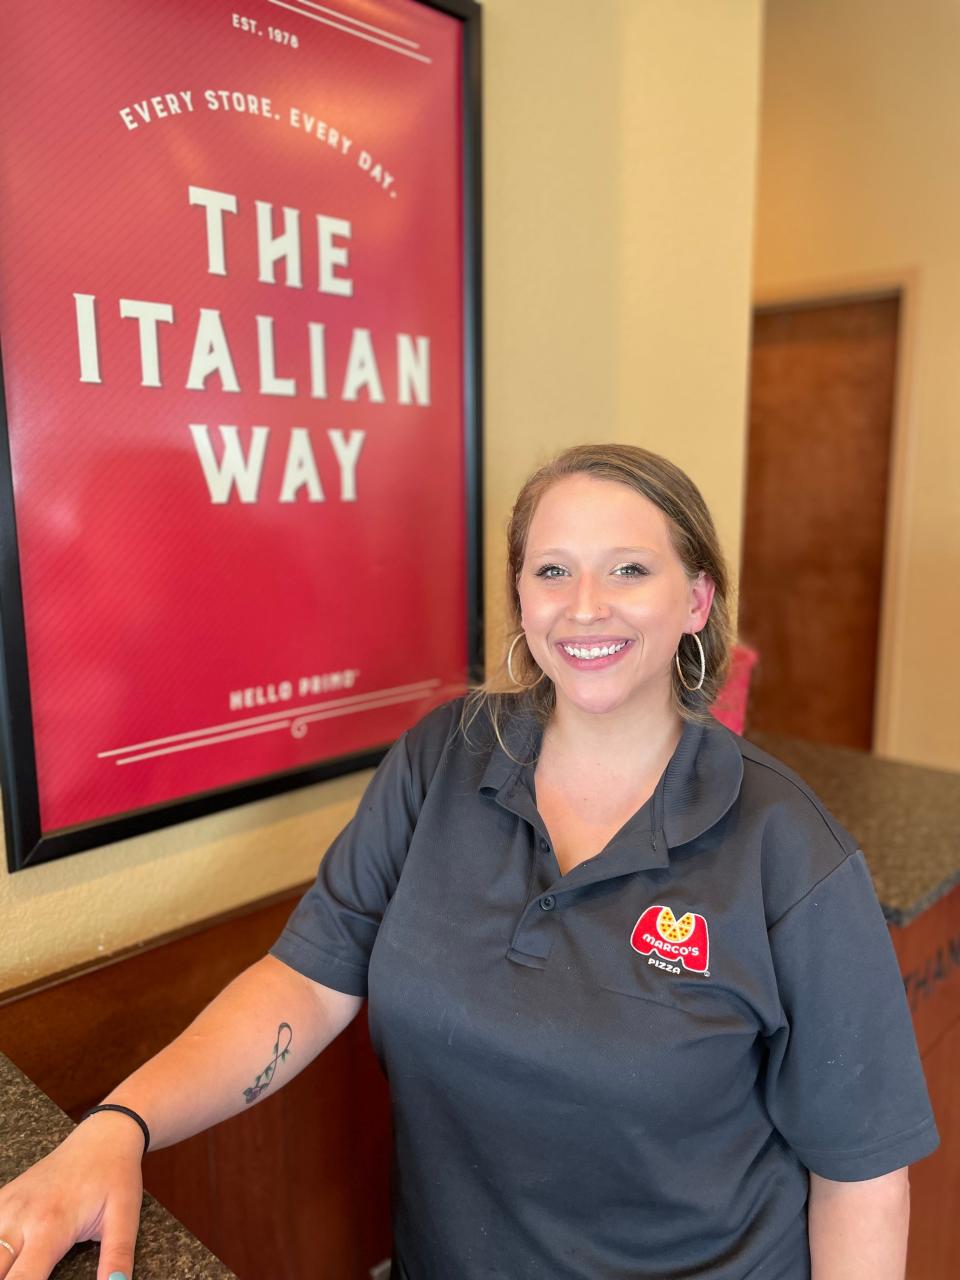 Nicole Clemmons, general manager of Marco's Pizza in Powell, treats her business as "her baby."